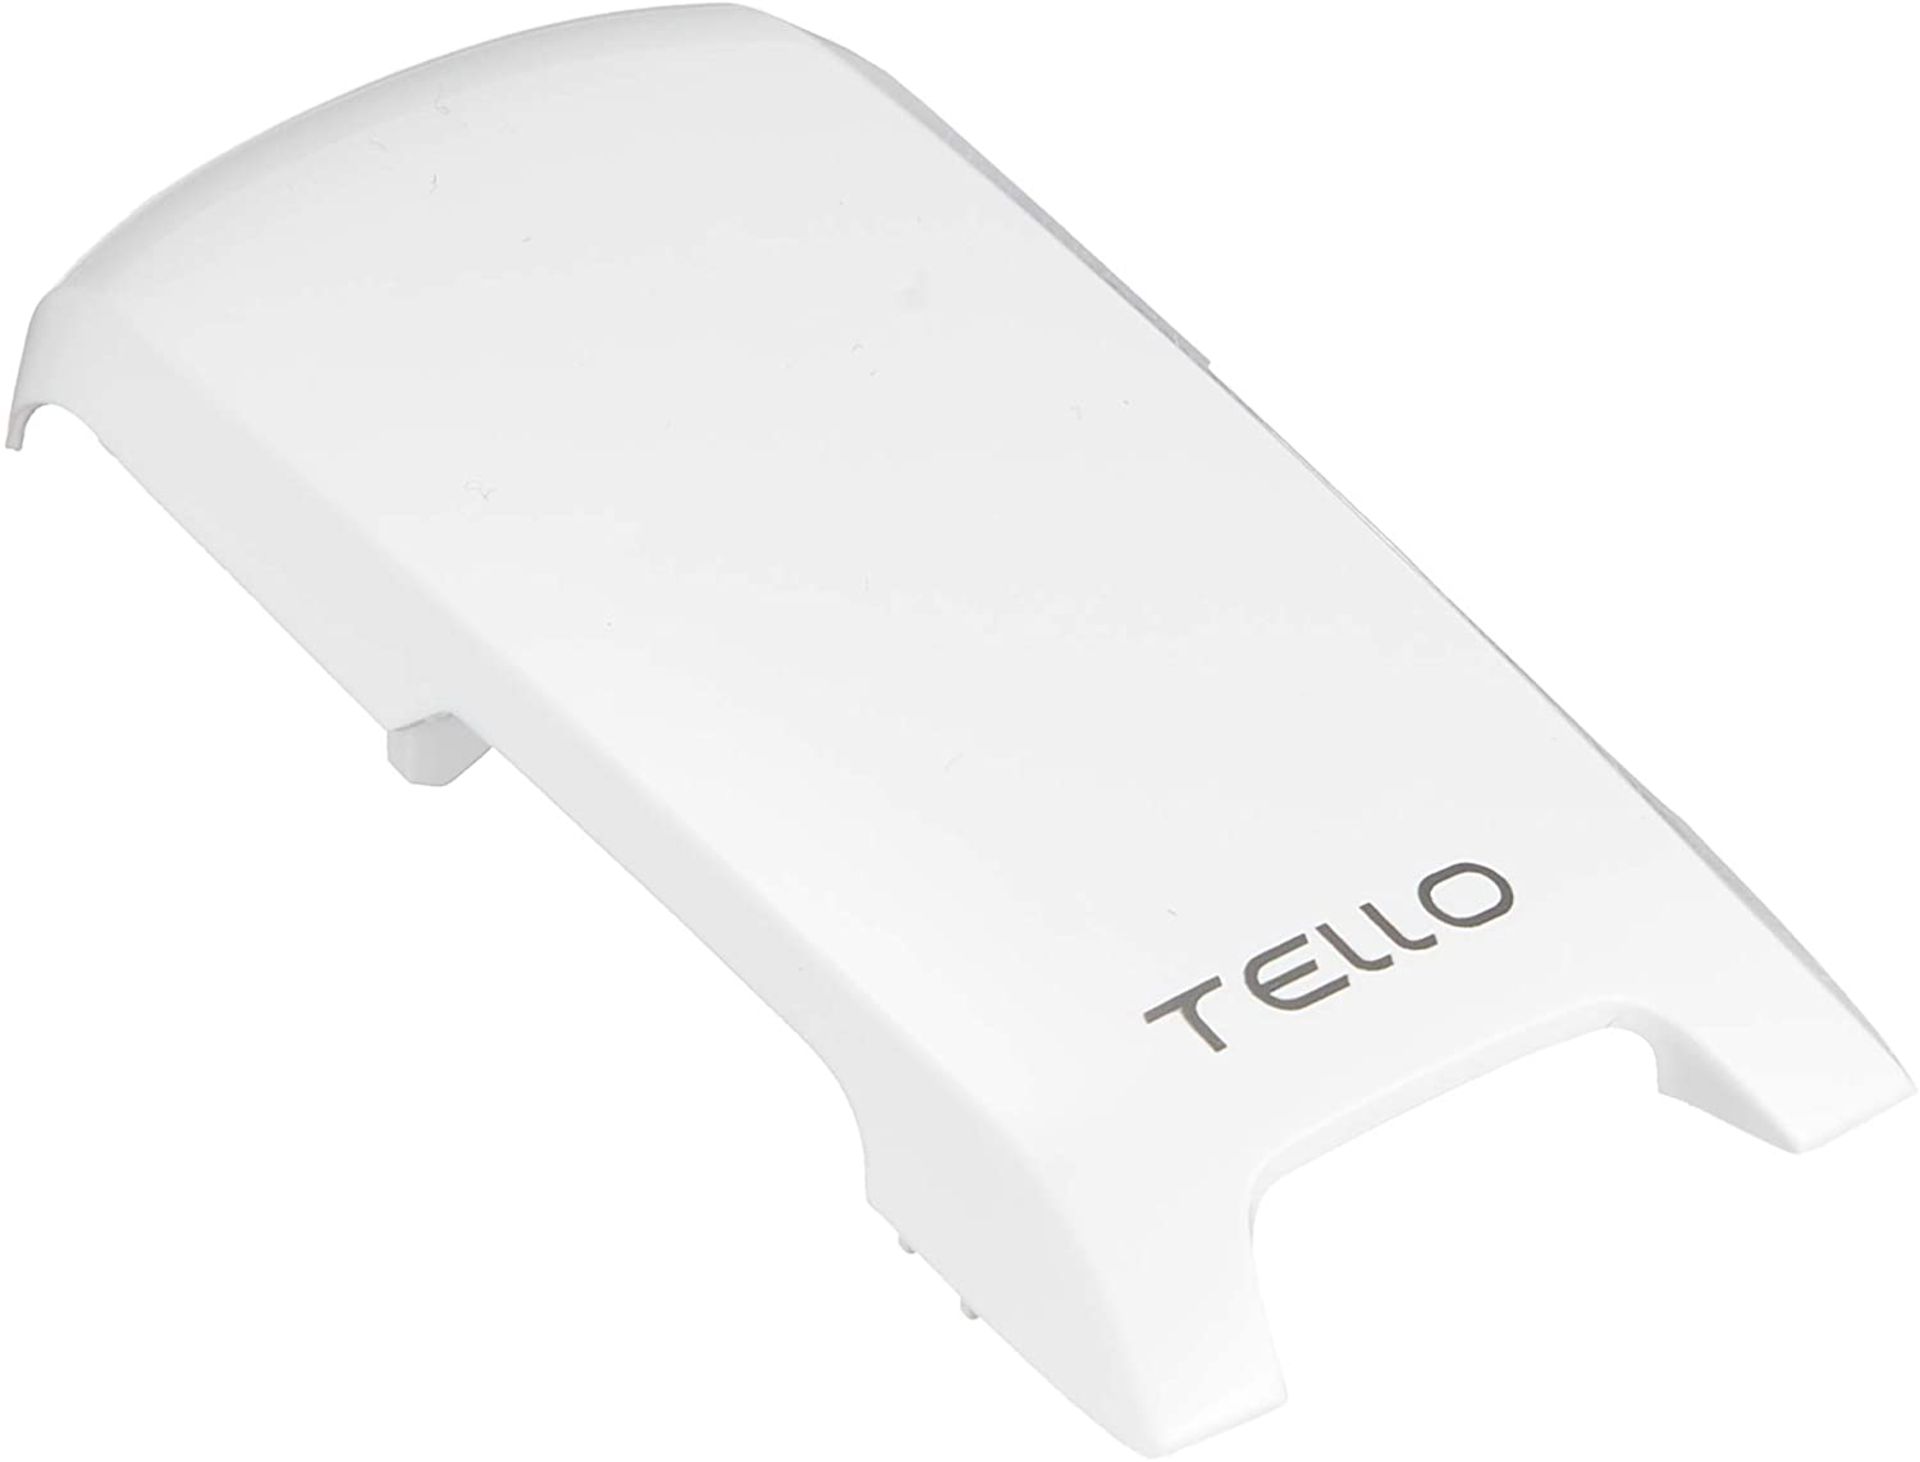 50 x Ryze Tello Drone Snap on Top Cover - White - Total RRP £400